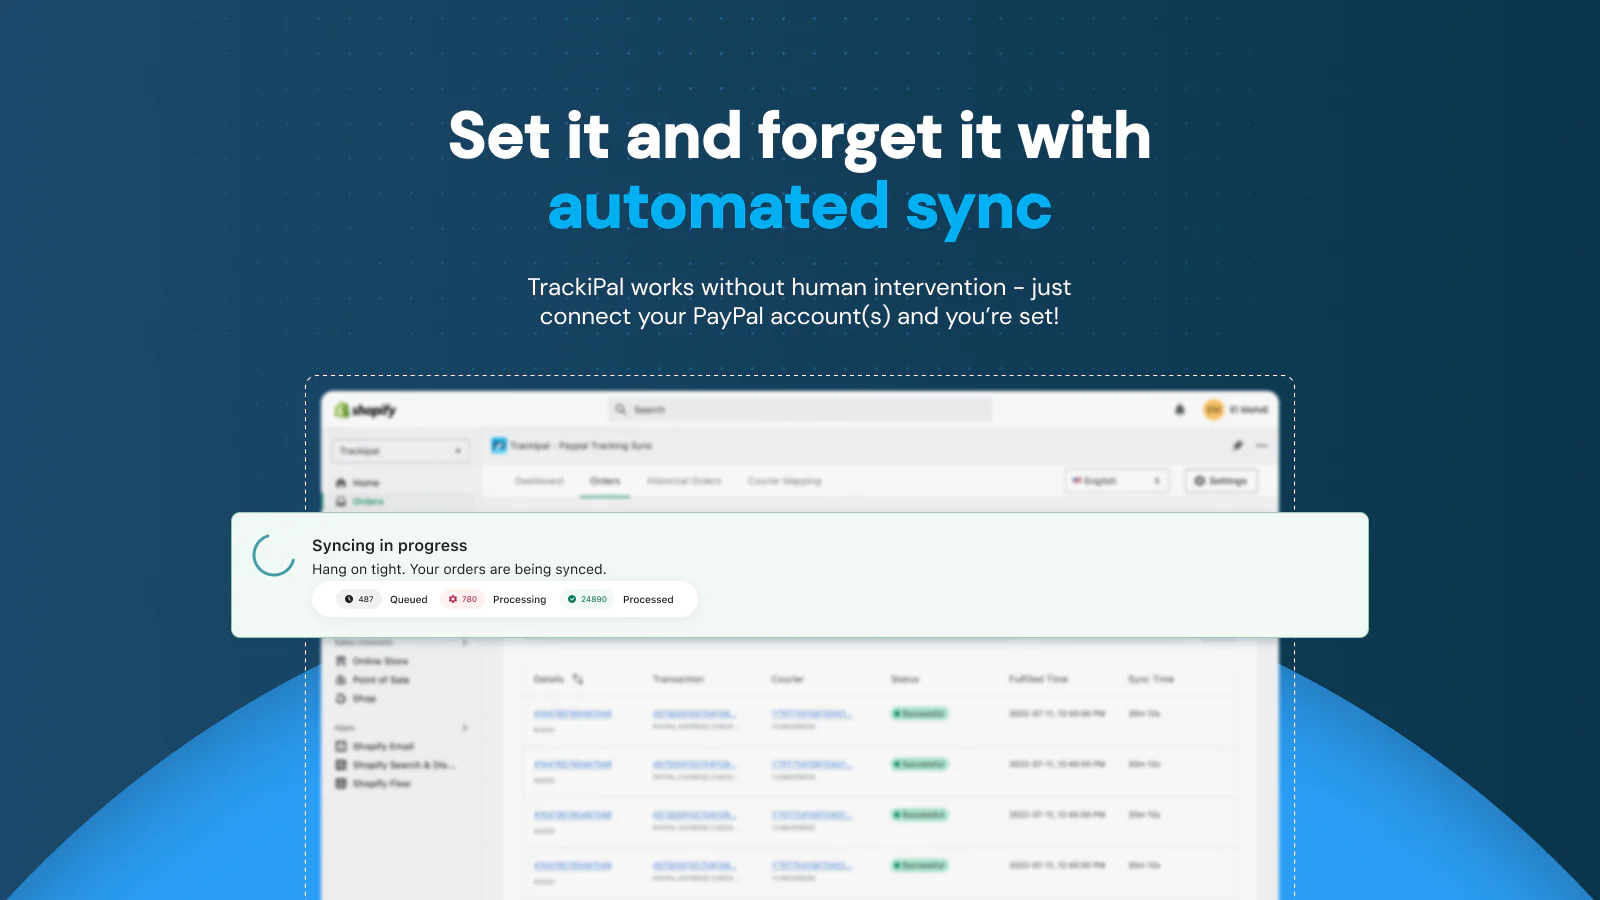 trackipal-paypal-tracking-sync-app-automated